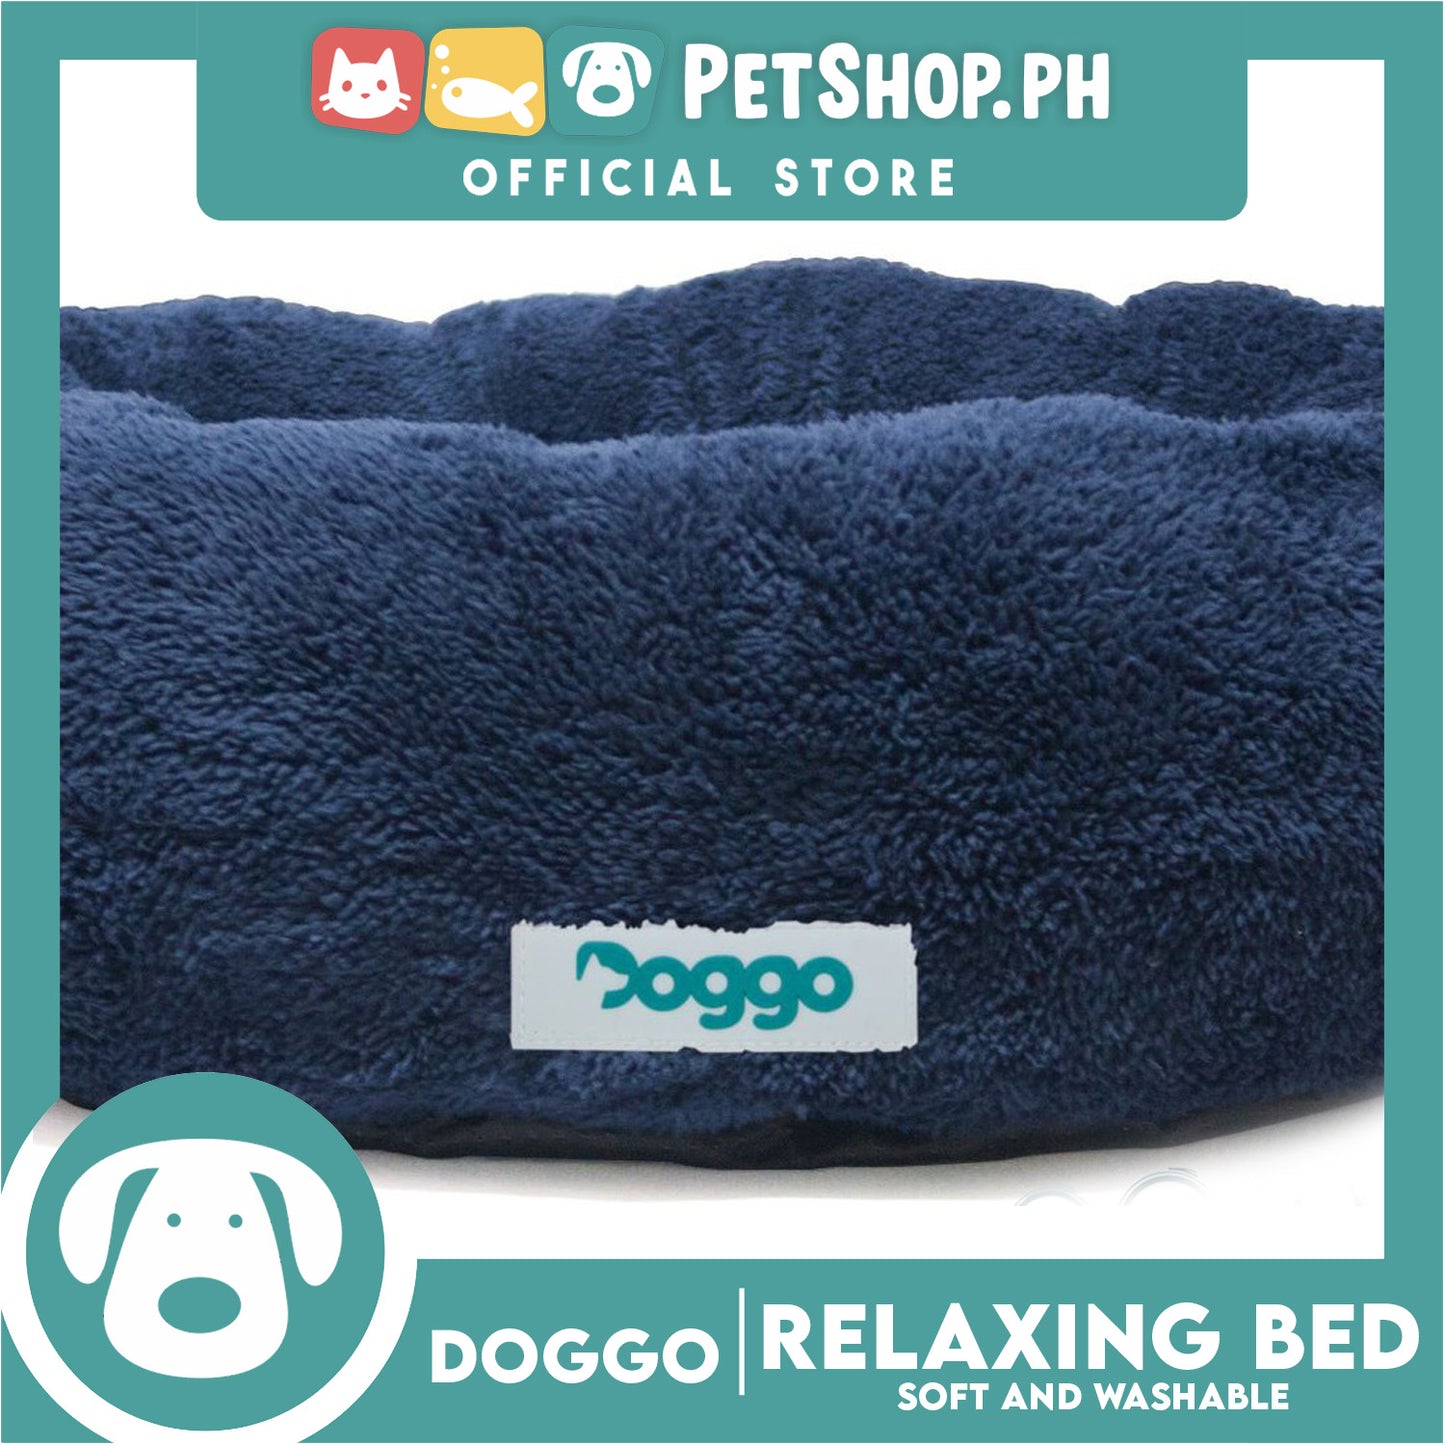 Doggo Relaxing Bed Navy Blue (Large) Round Fur Bed Machine Washable